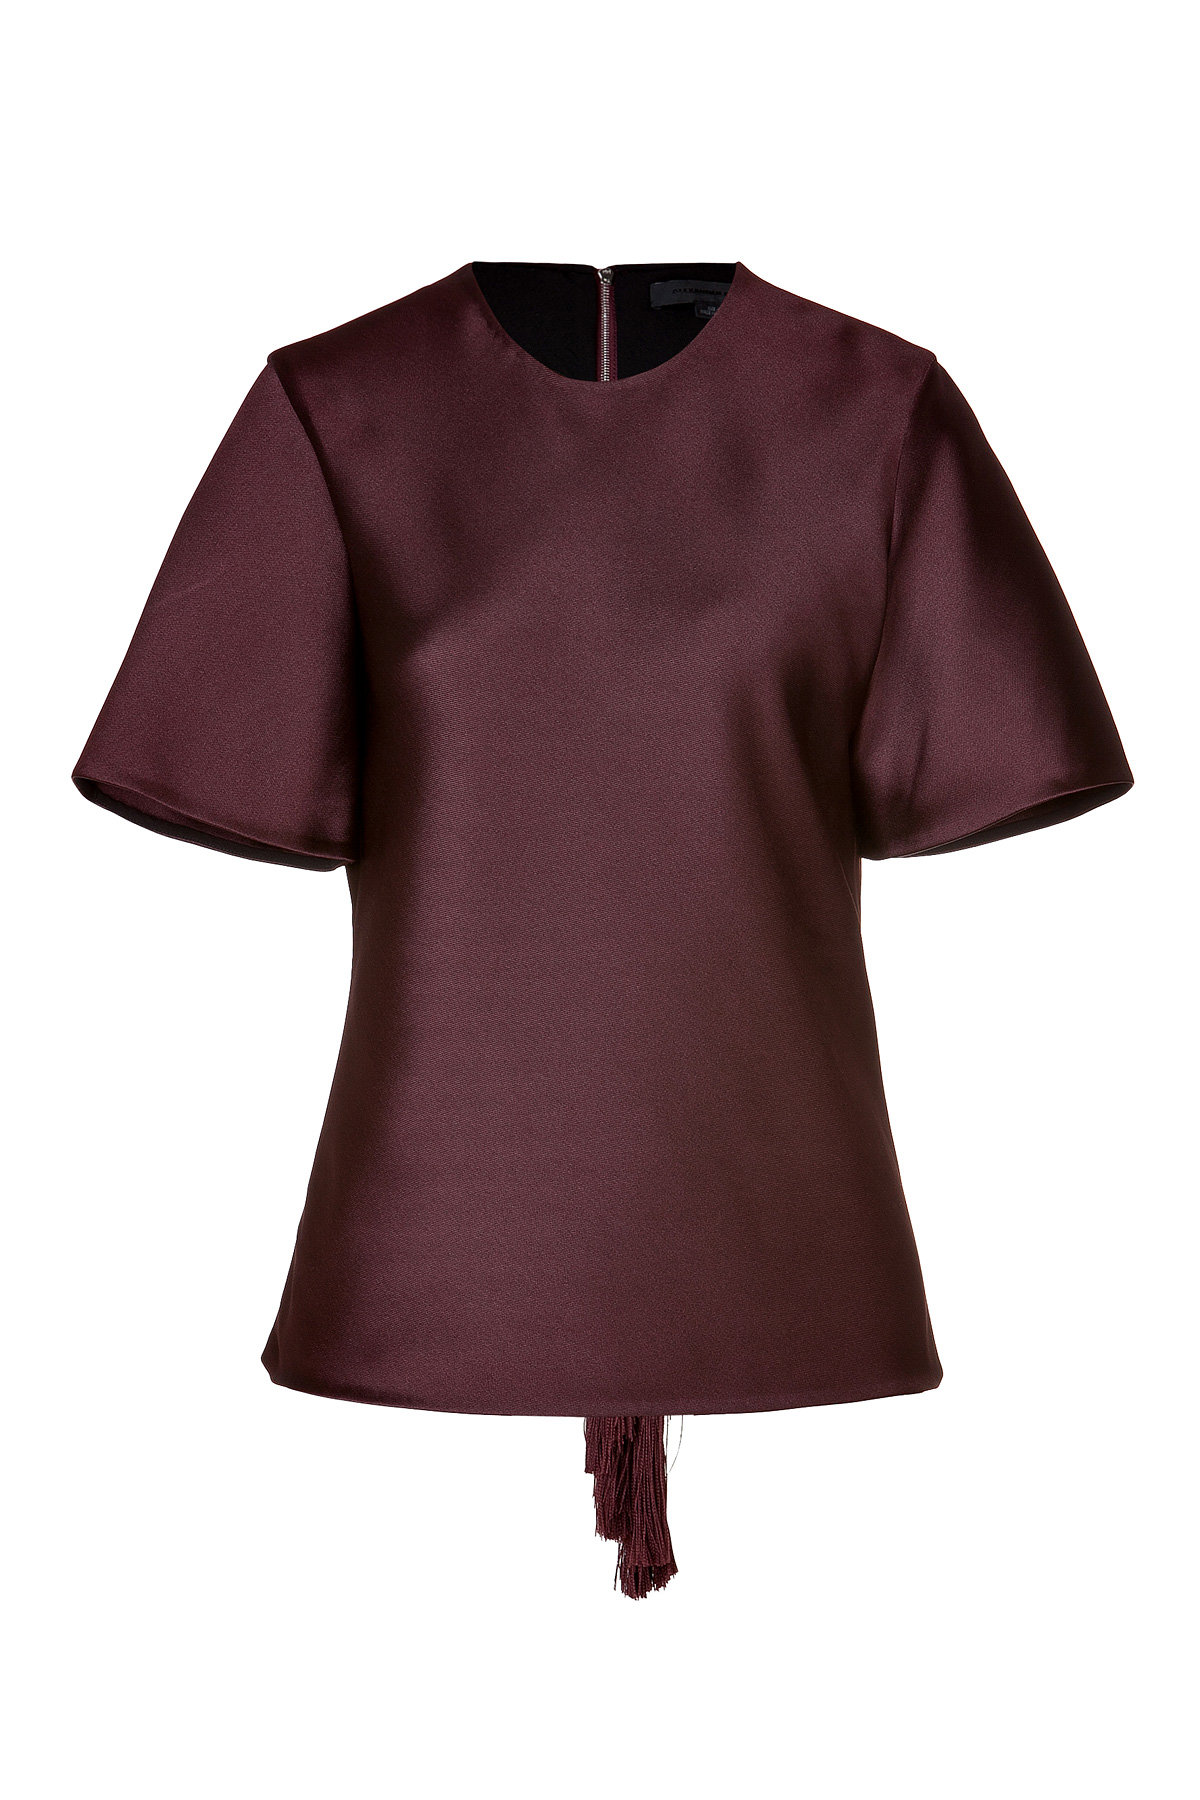 Oxblood Bias Cut Top with Back Fringe by Alexander Wang